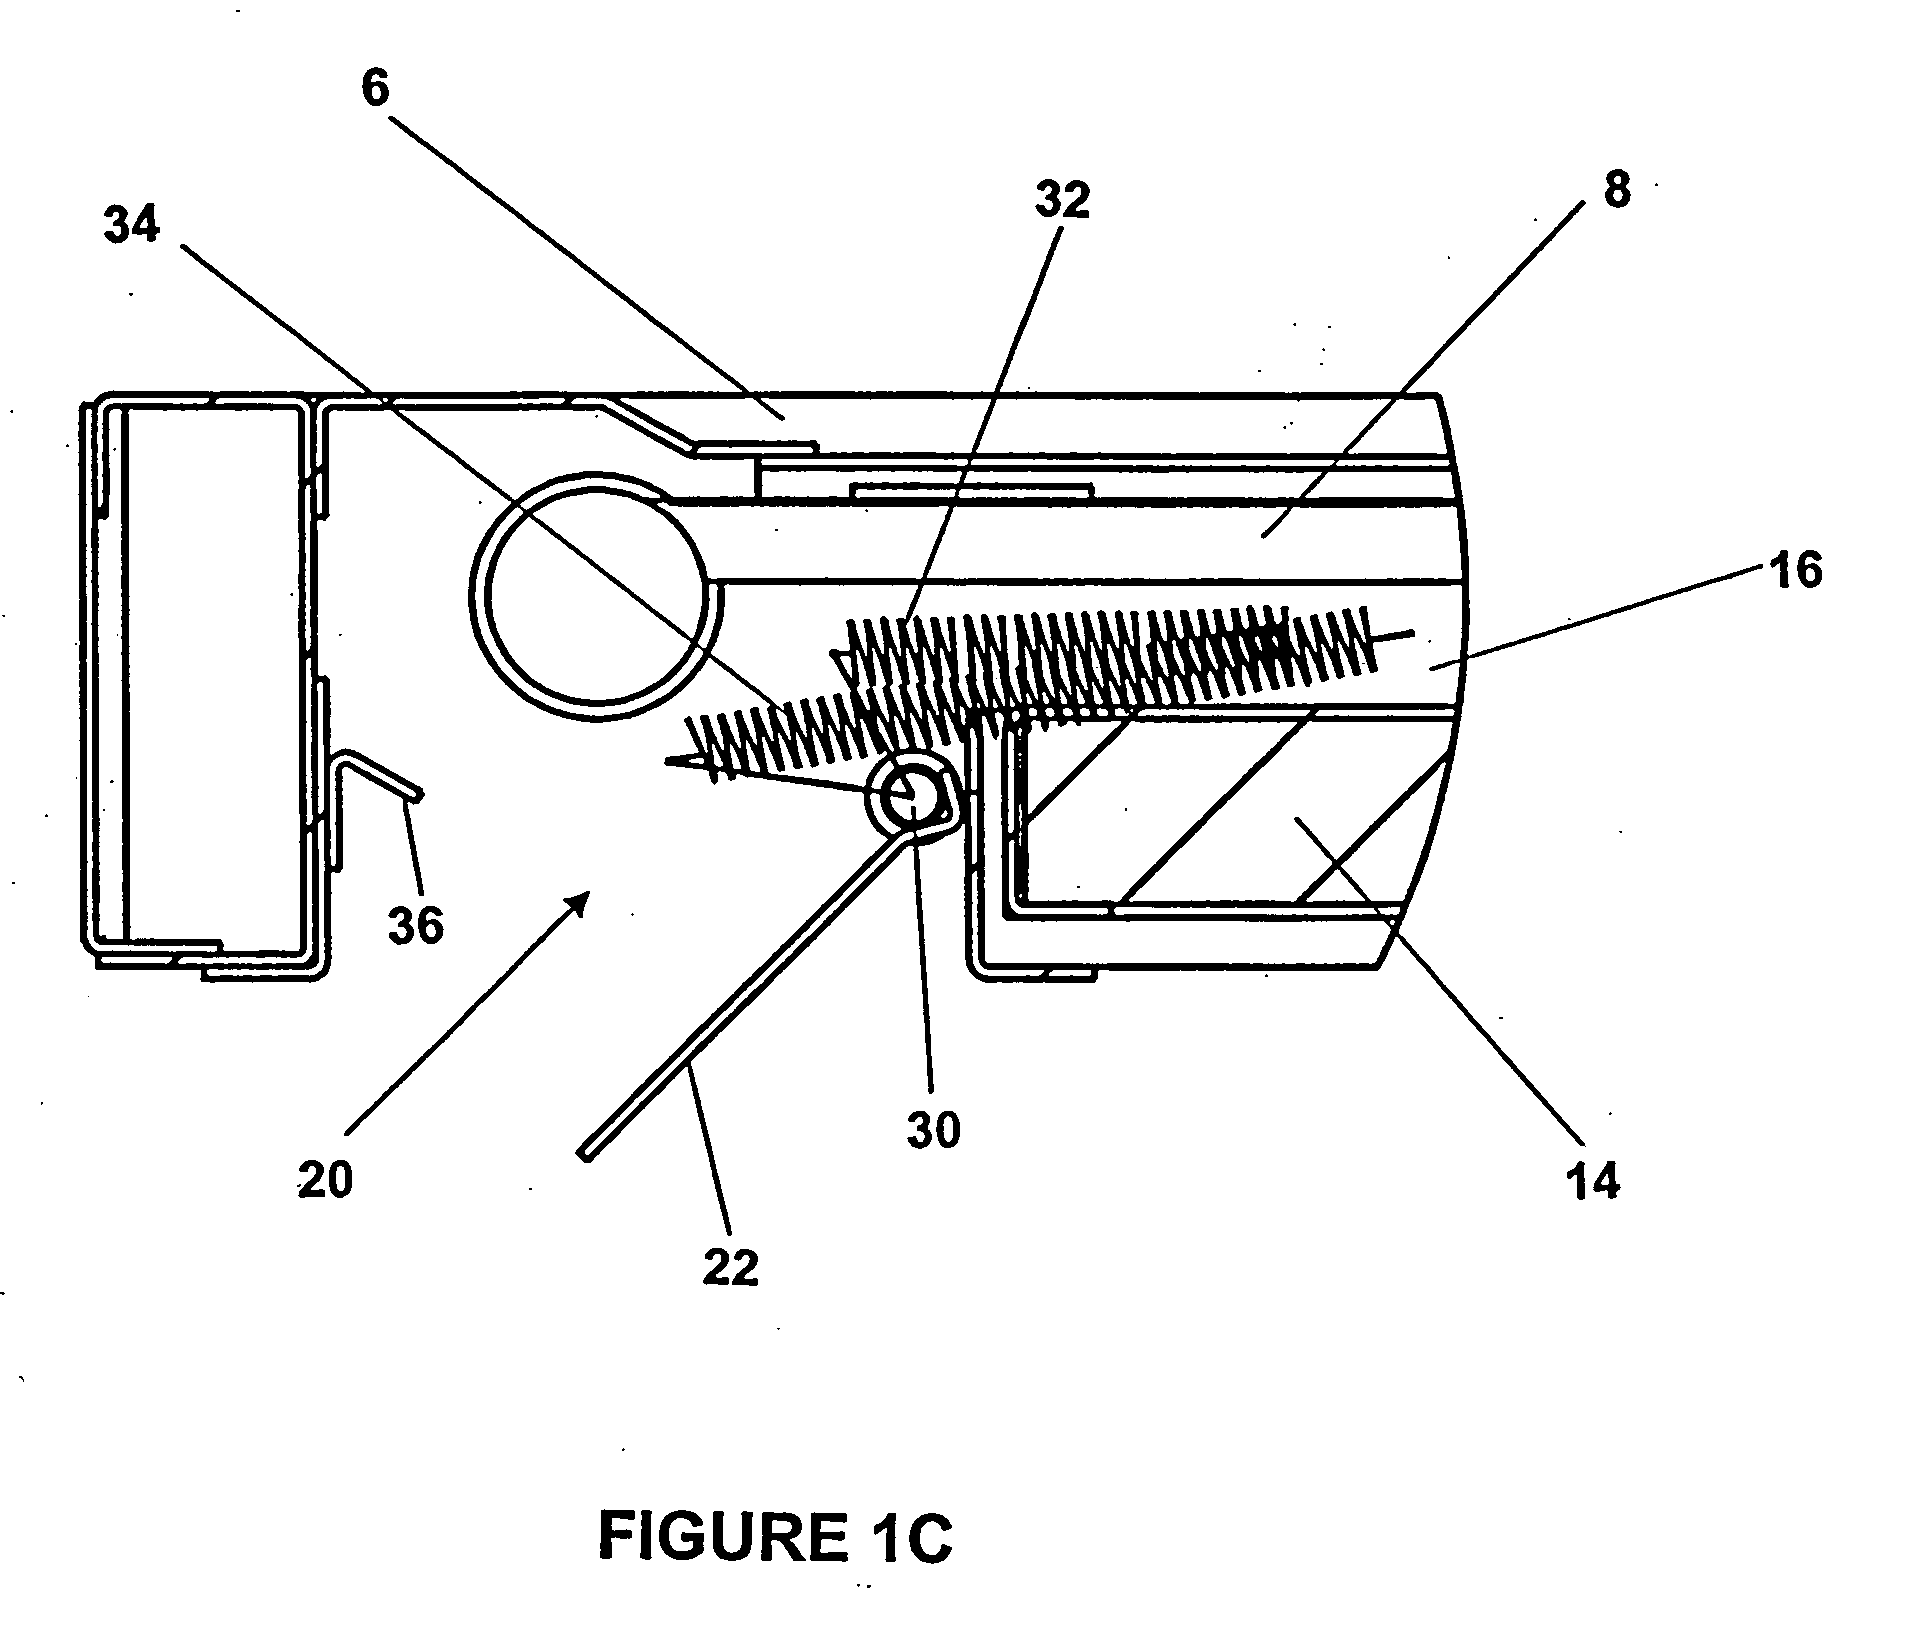 Method and apparatus for solar collector with integral stagnation temperature control